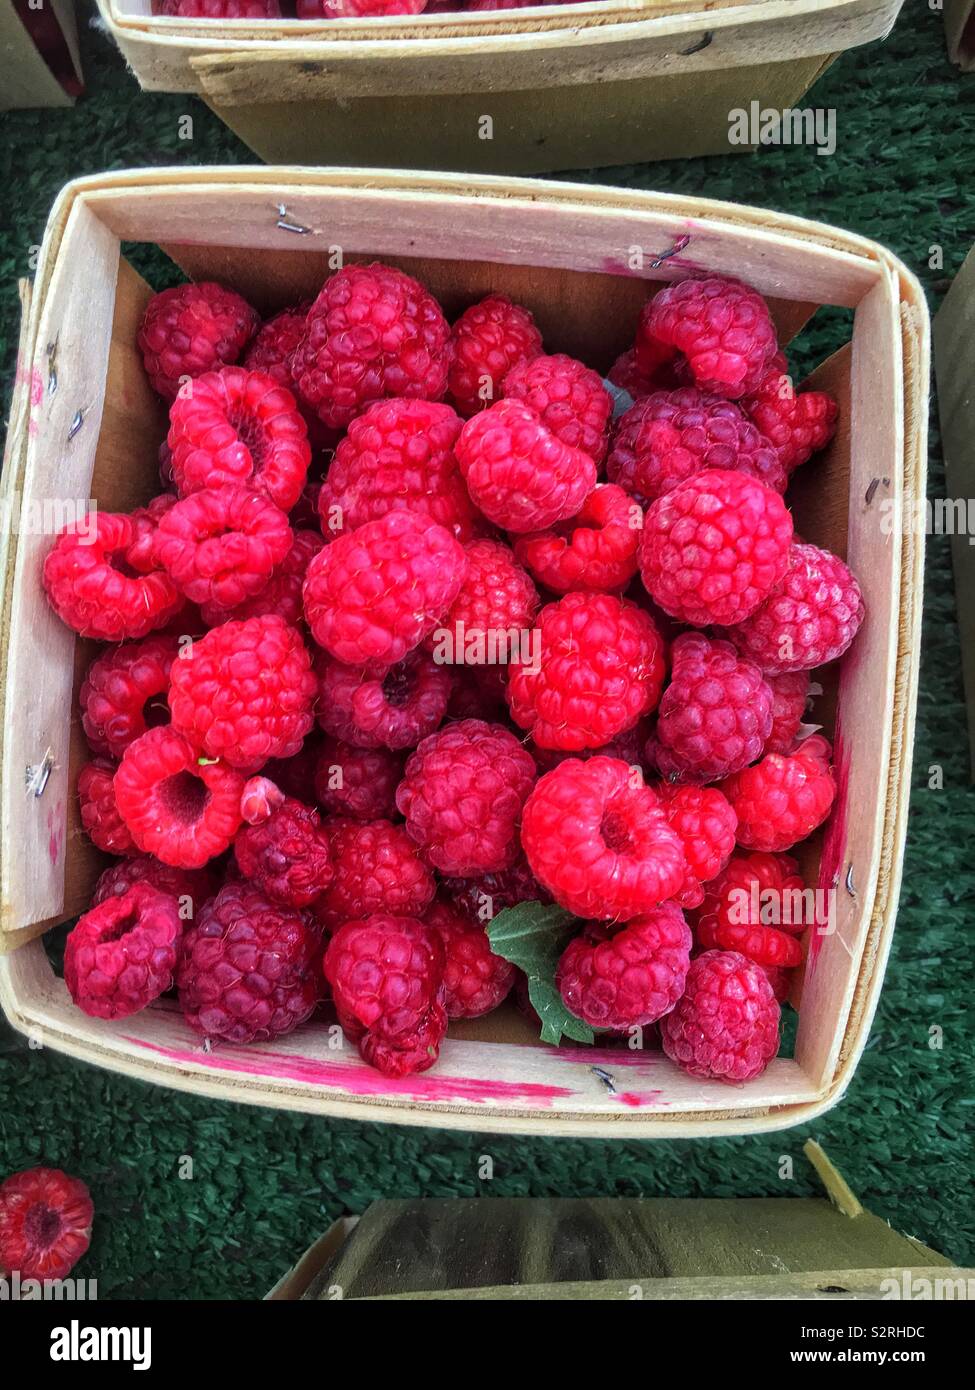 Farm fresh delicious red raspberries piled into a single serving basket. Stock Photo